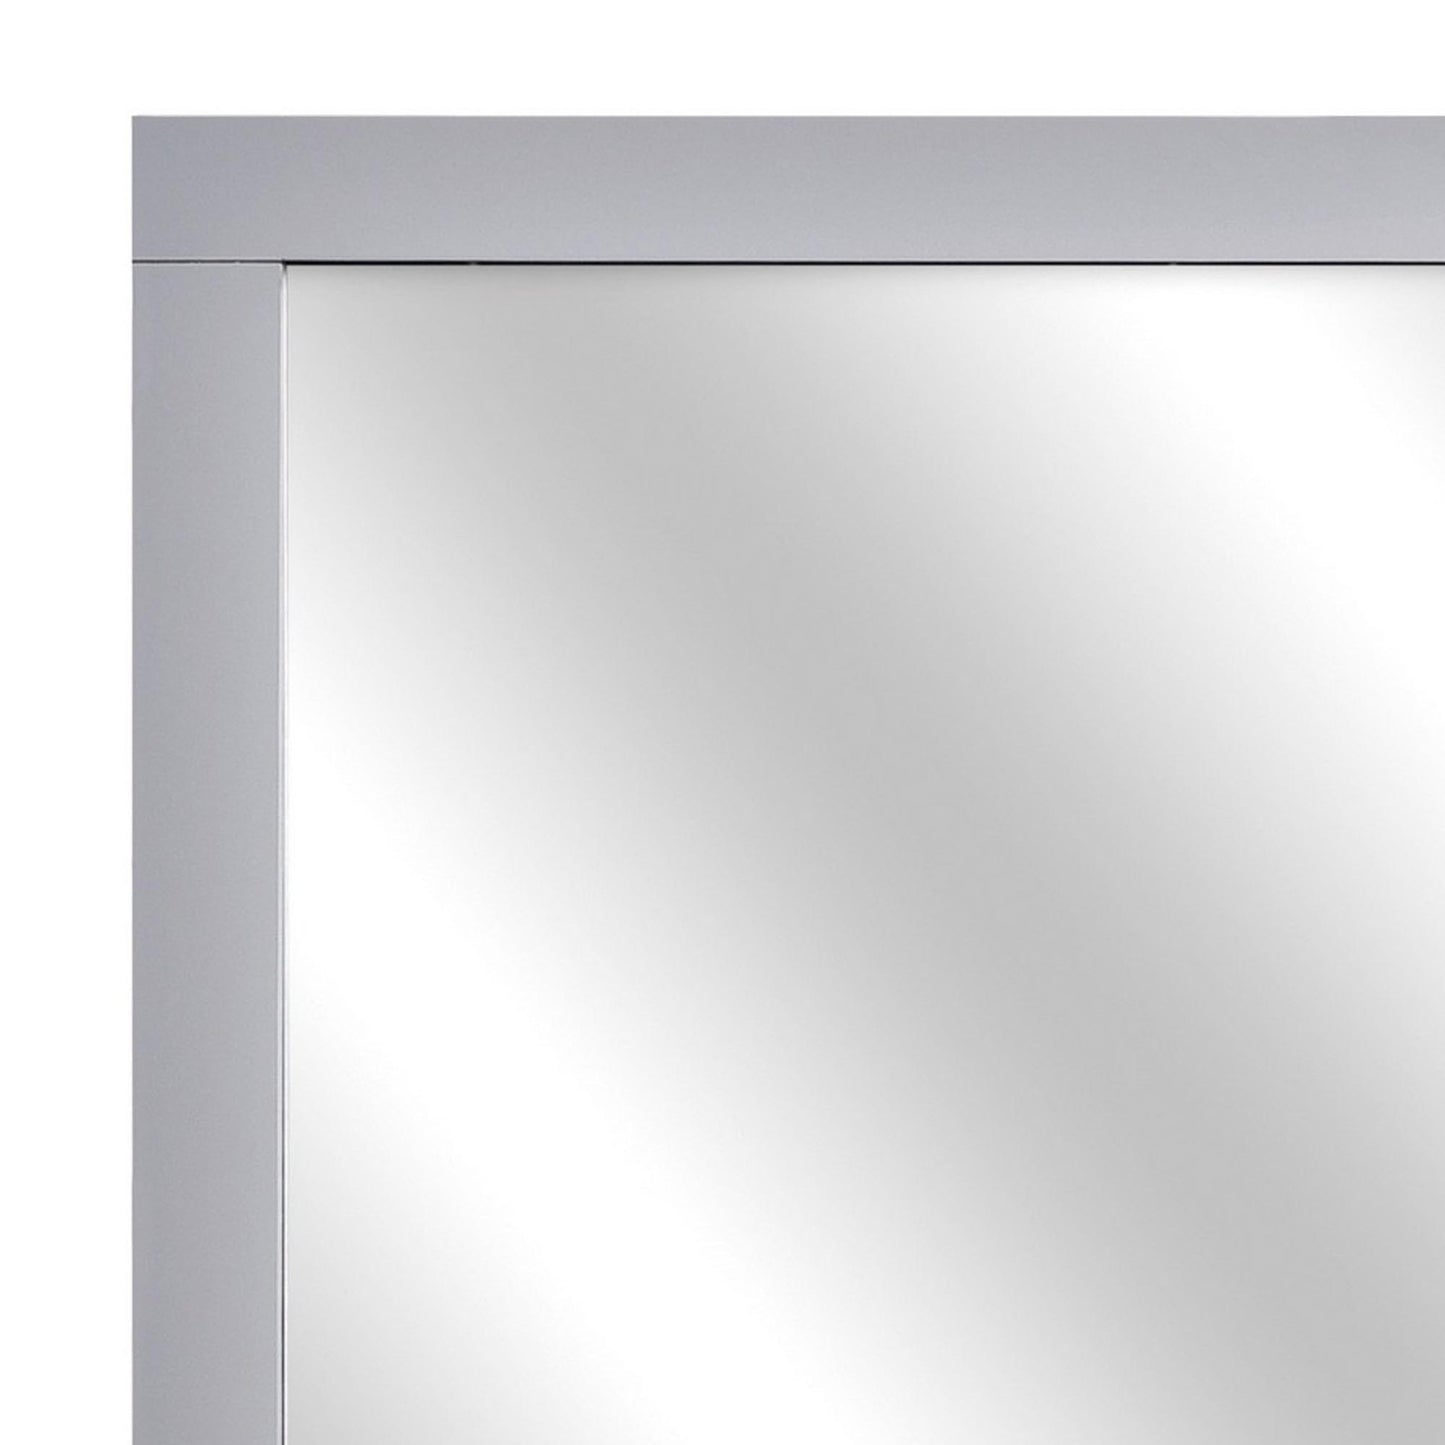 Benzara Gray and Silver Square Shape Wooden Frame Mirror With Mounting Hardware